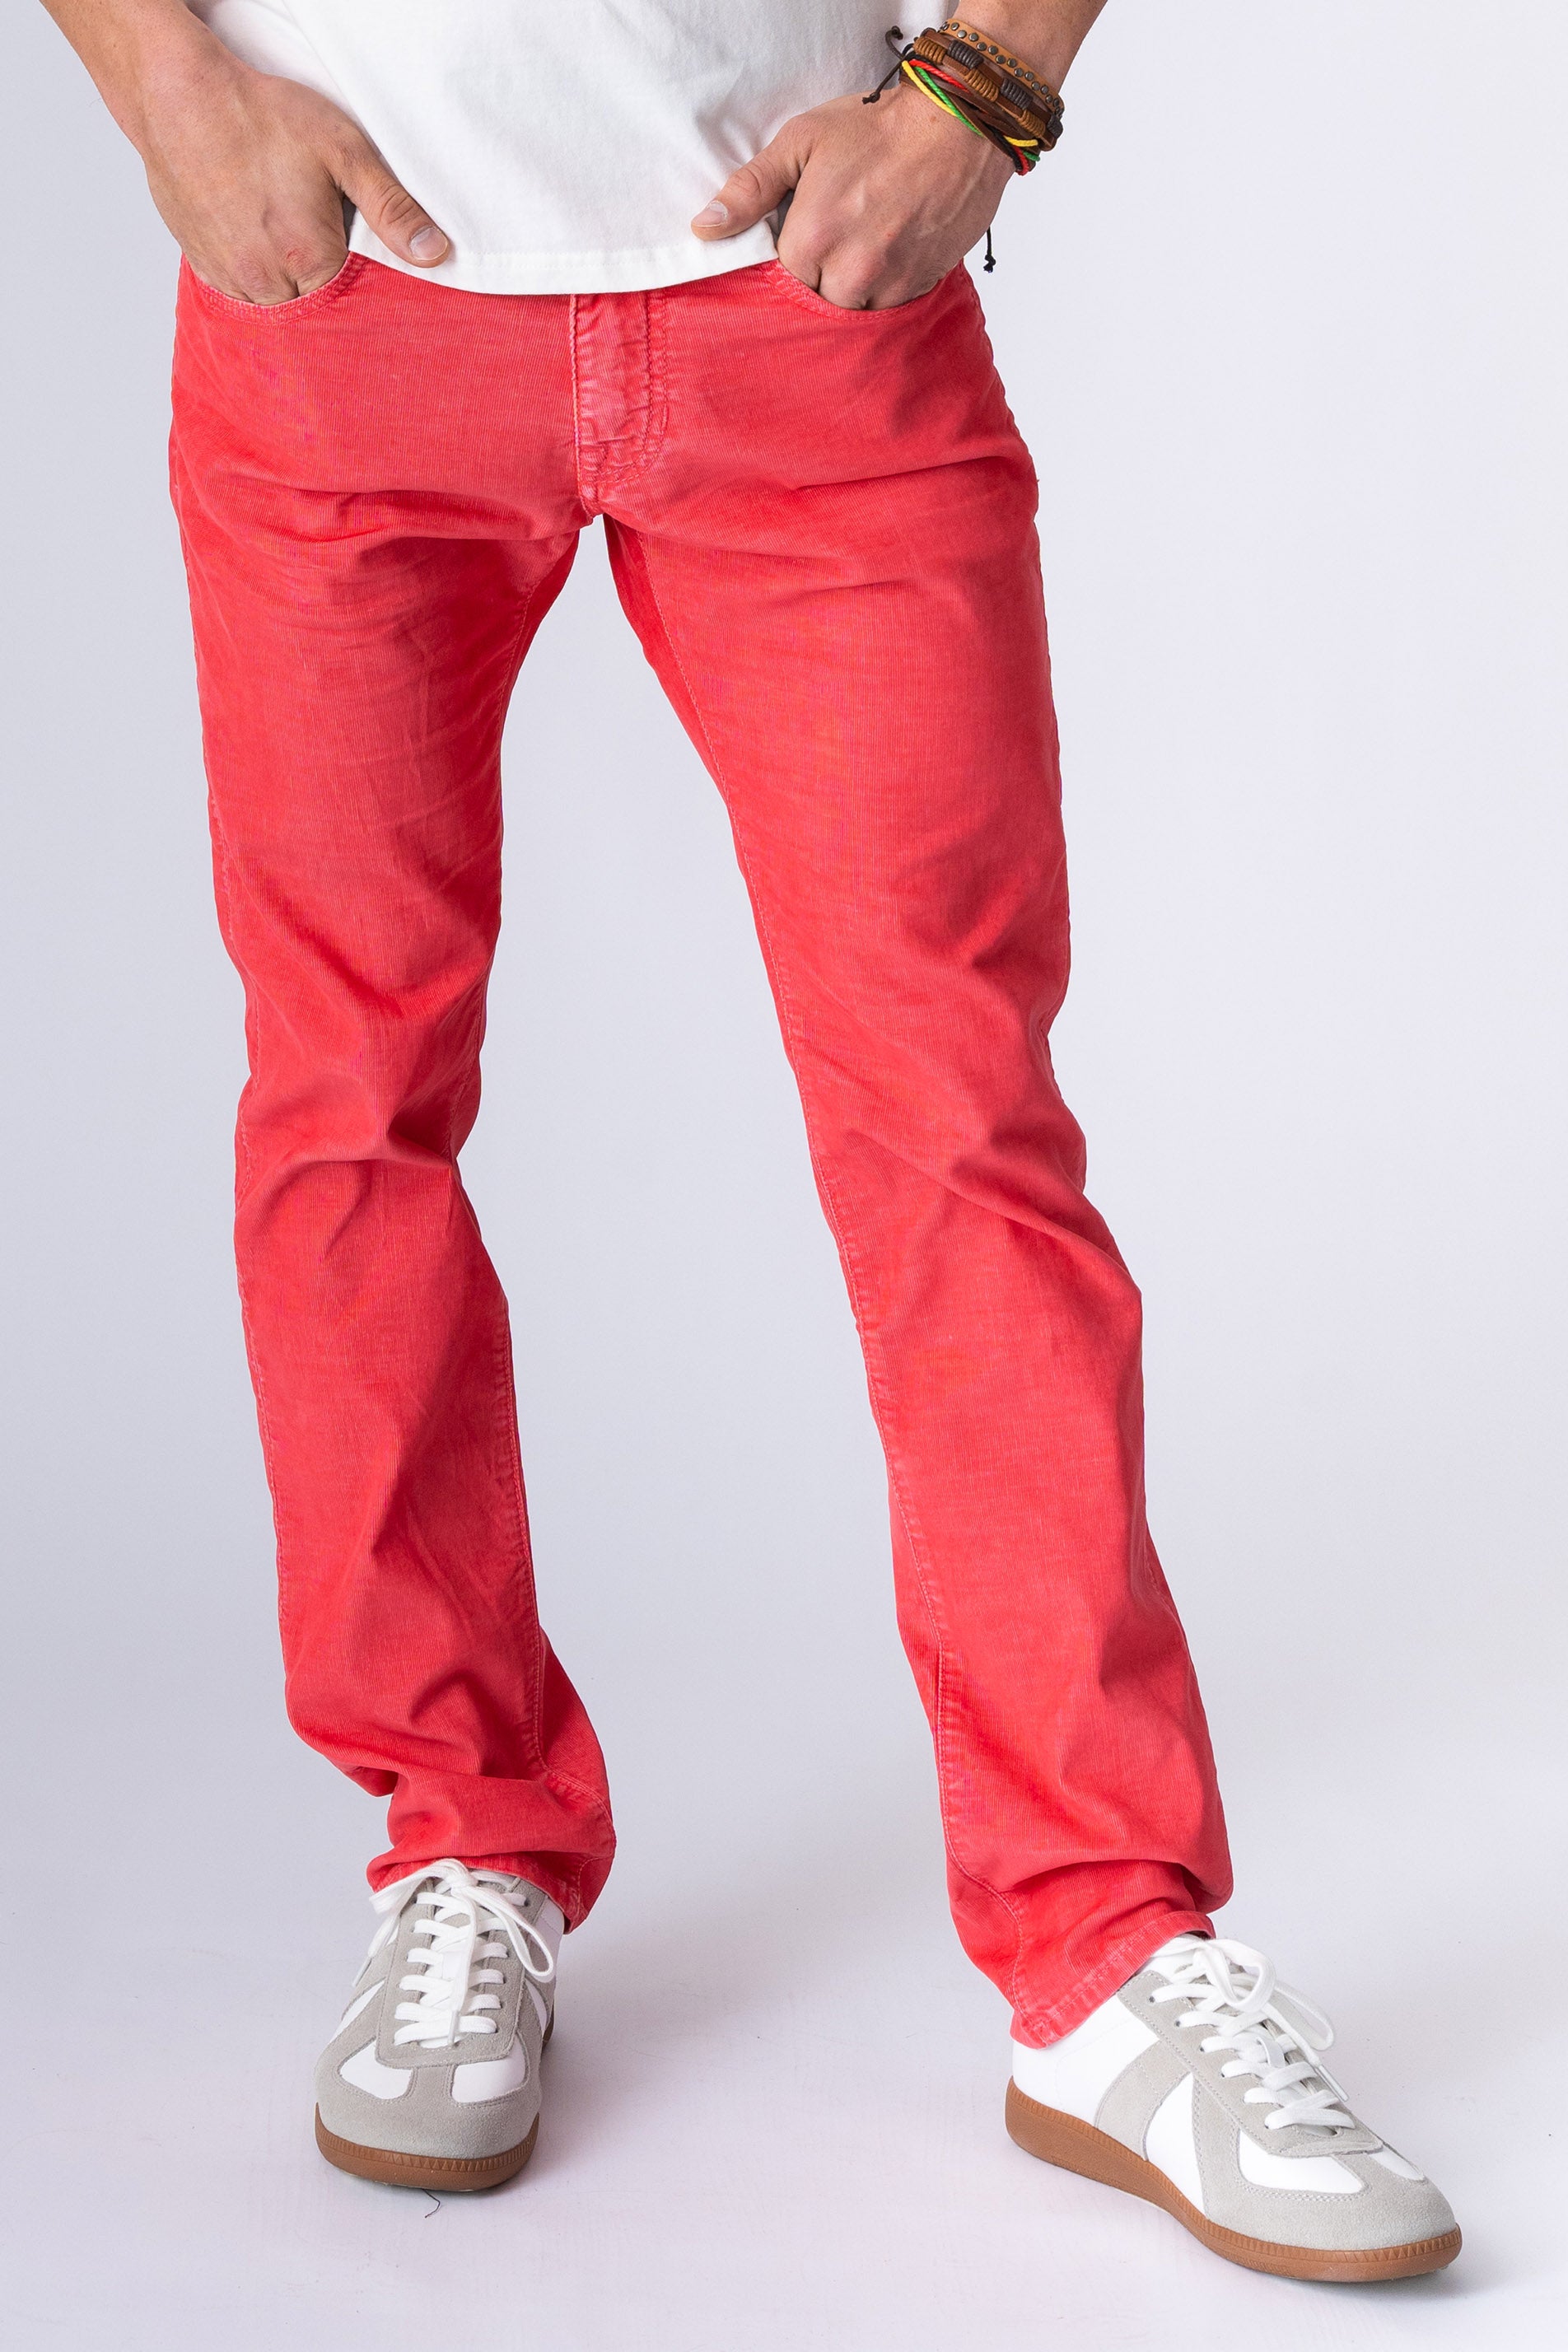 BARFLY SLIM CORDUROY IN ROCOCCO RED